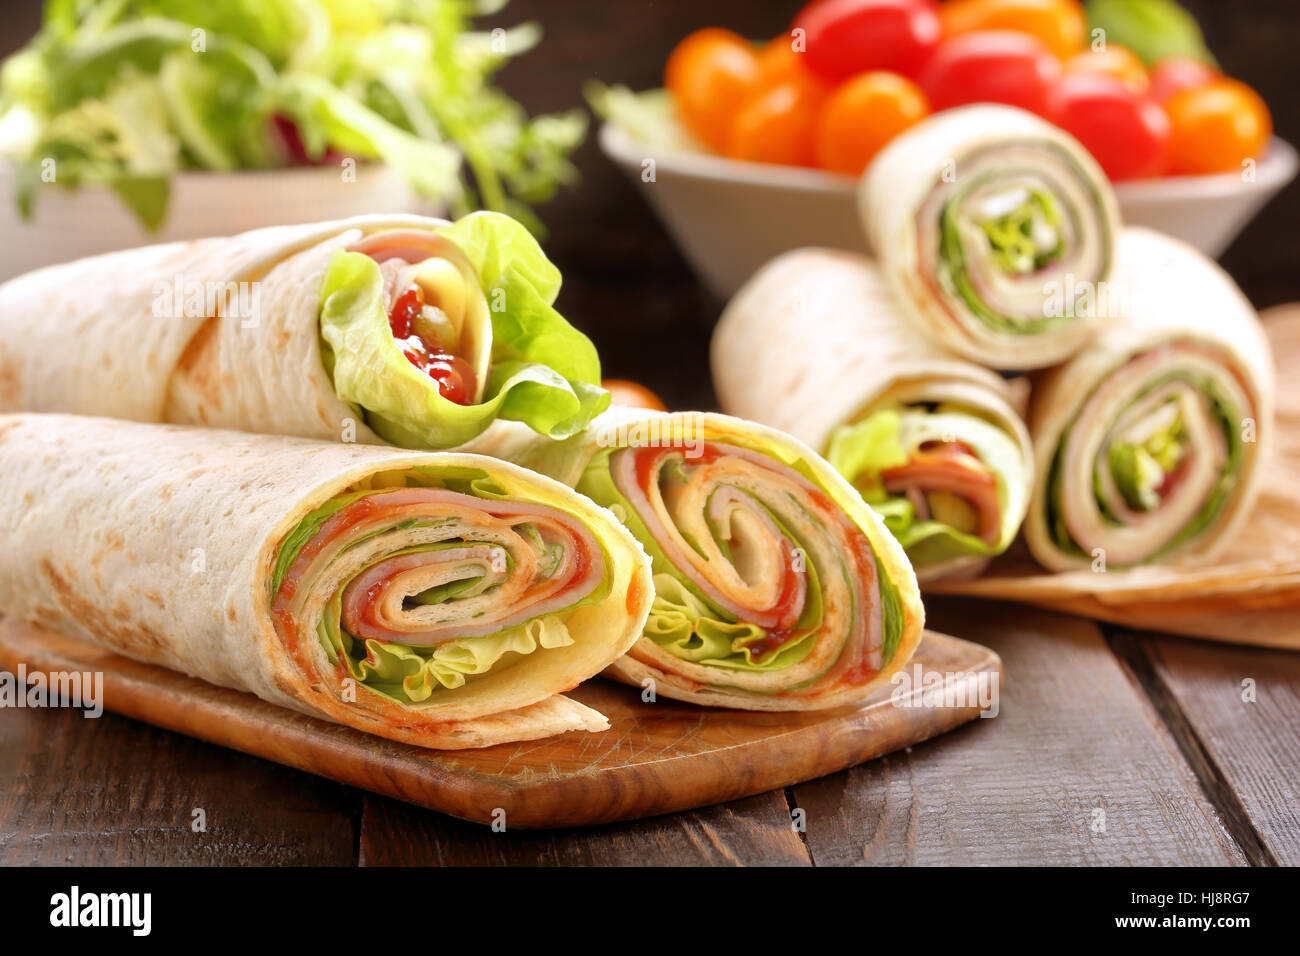 Sandwiches twisted roll tortilla wraps with ham cheese and 